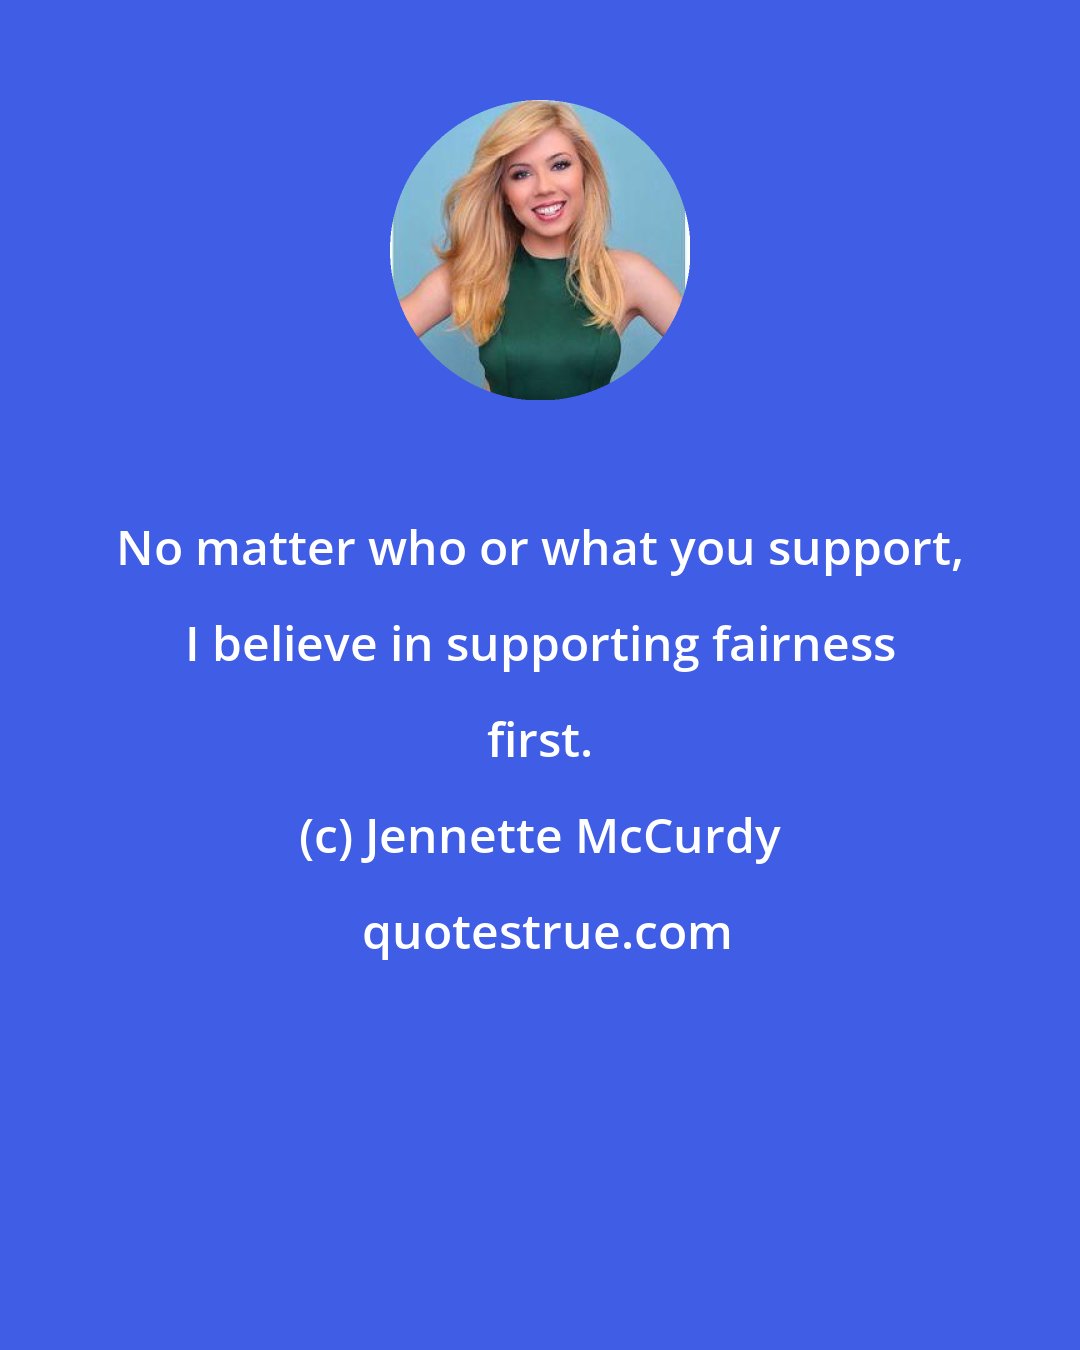 Jennette McCurdy: No matter who or what you support, I believe in supporting fairness first.